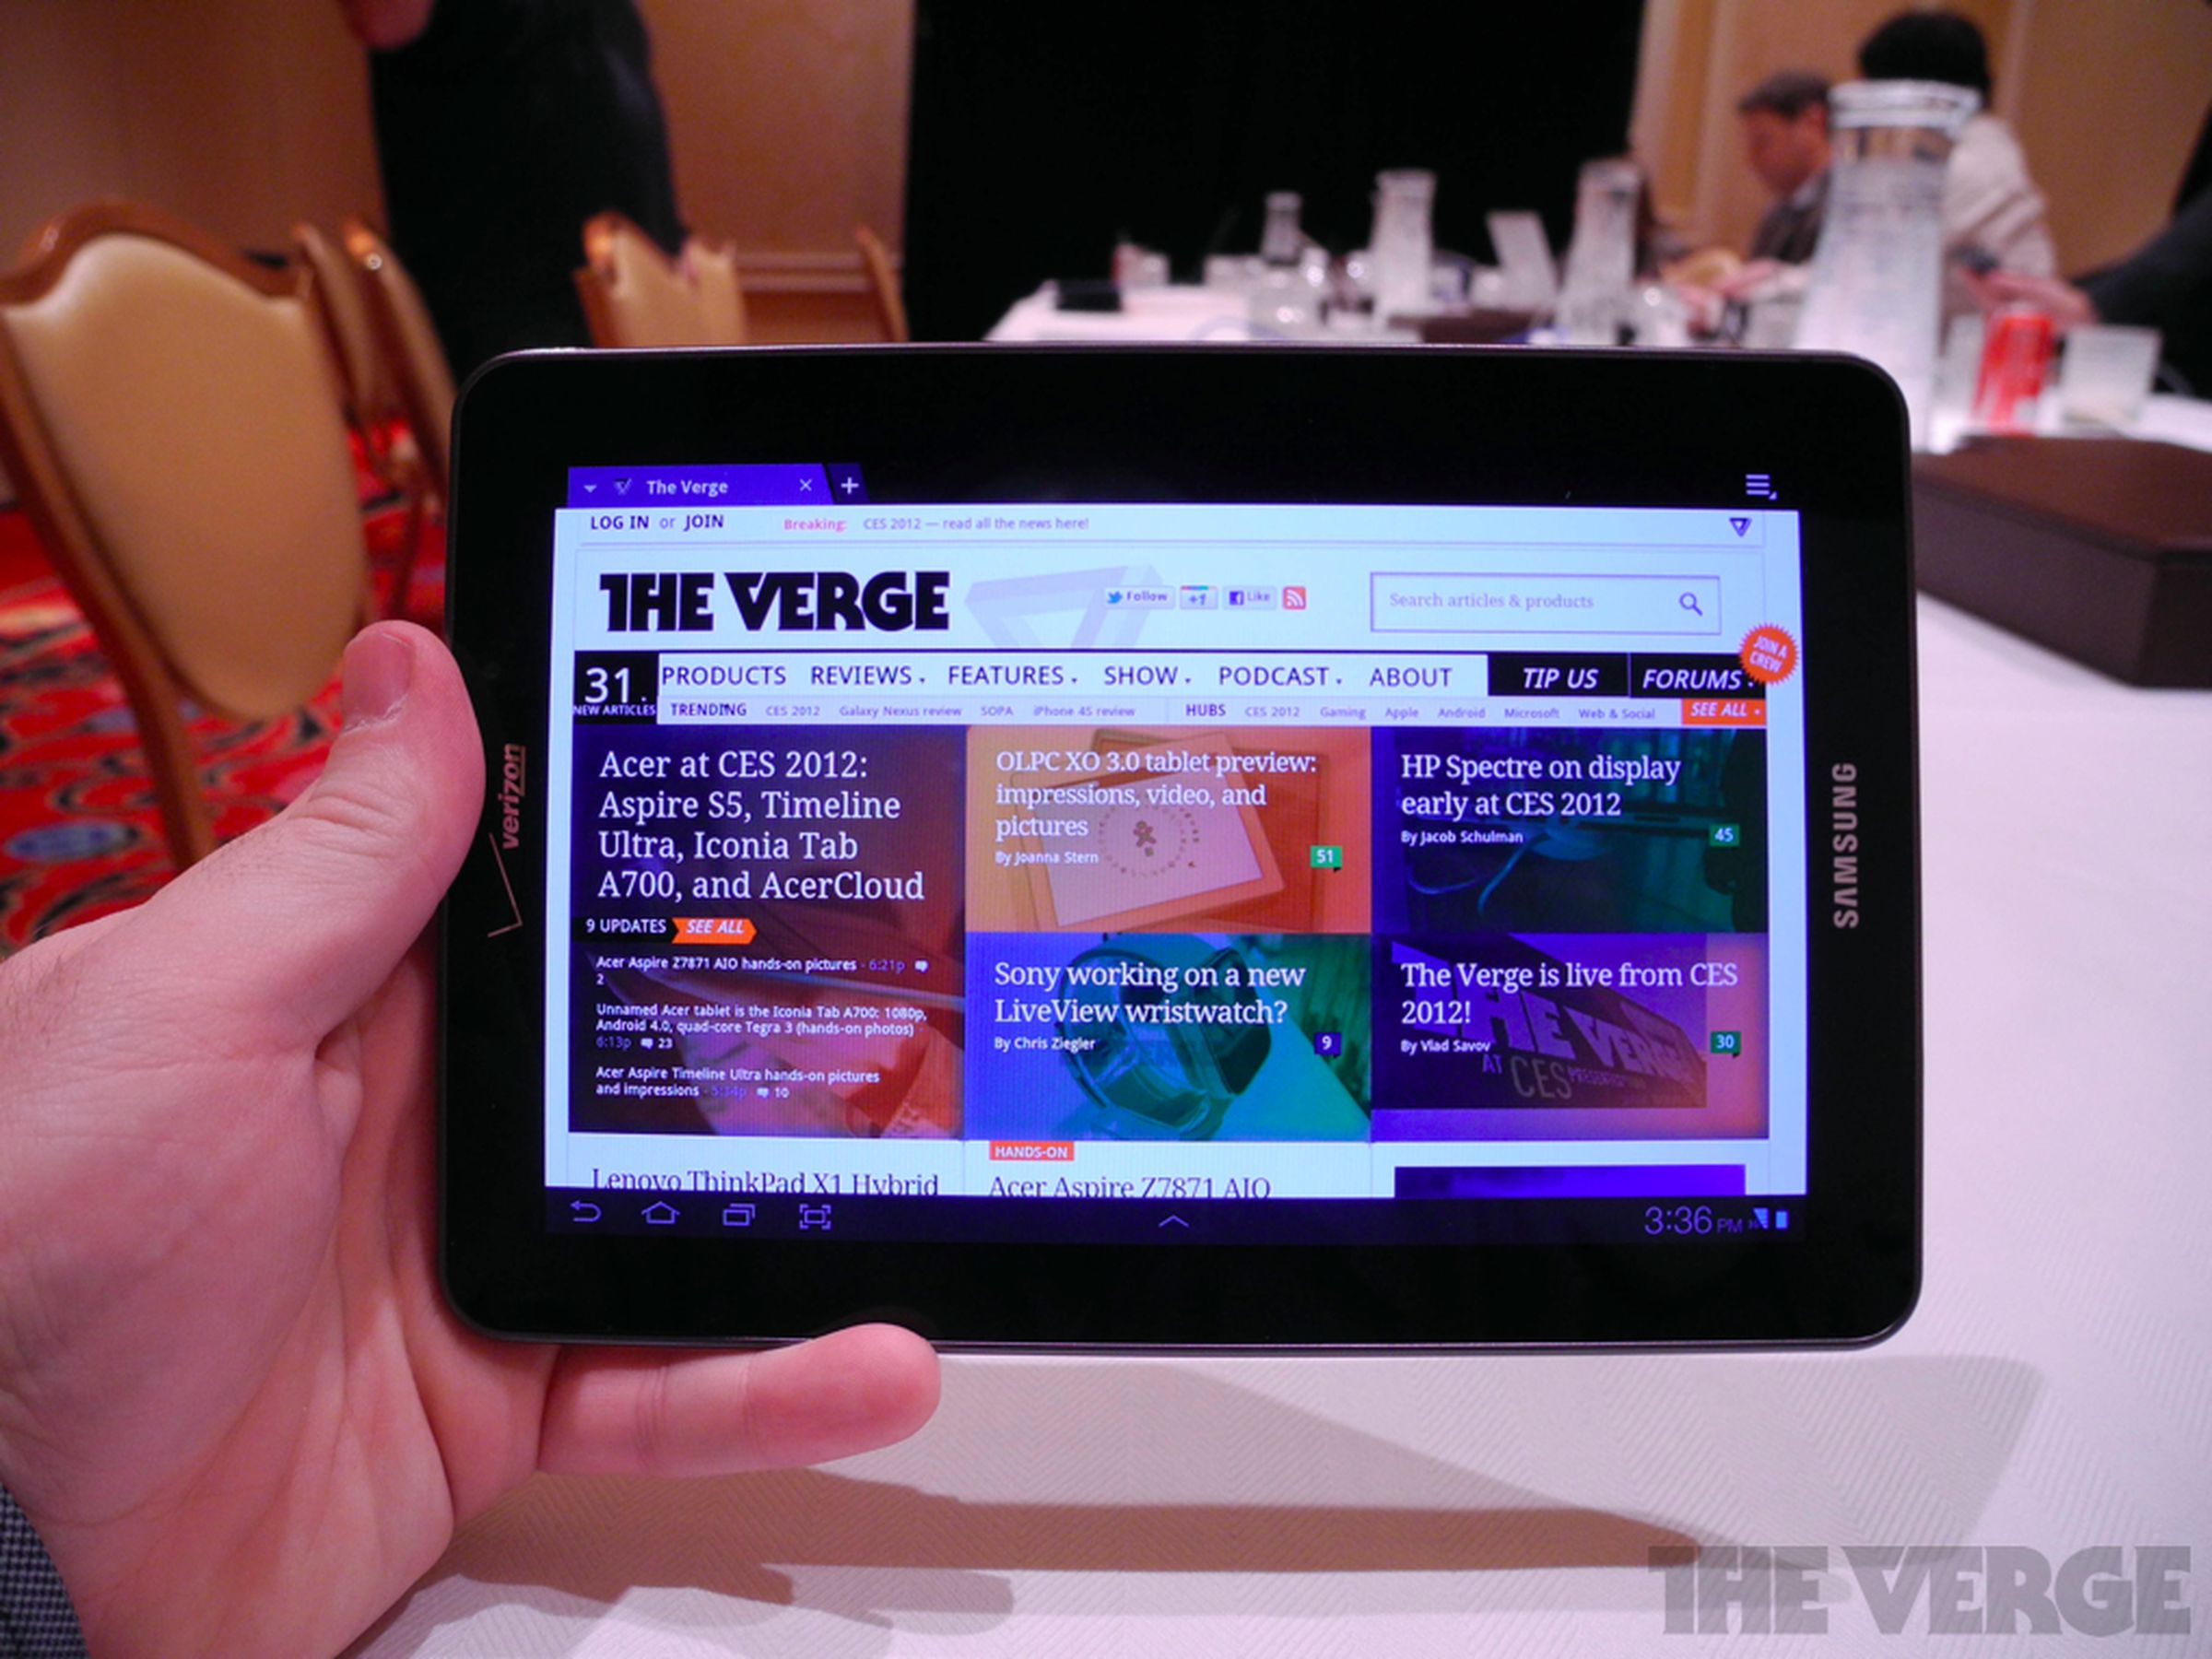 Samsung Galaxy Tab 7.7 for Verizon hands-on pictures